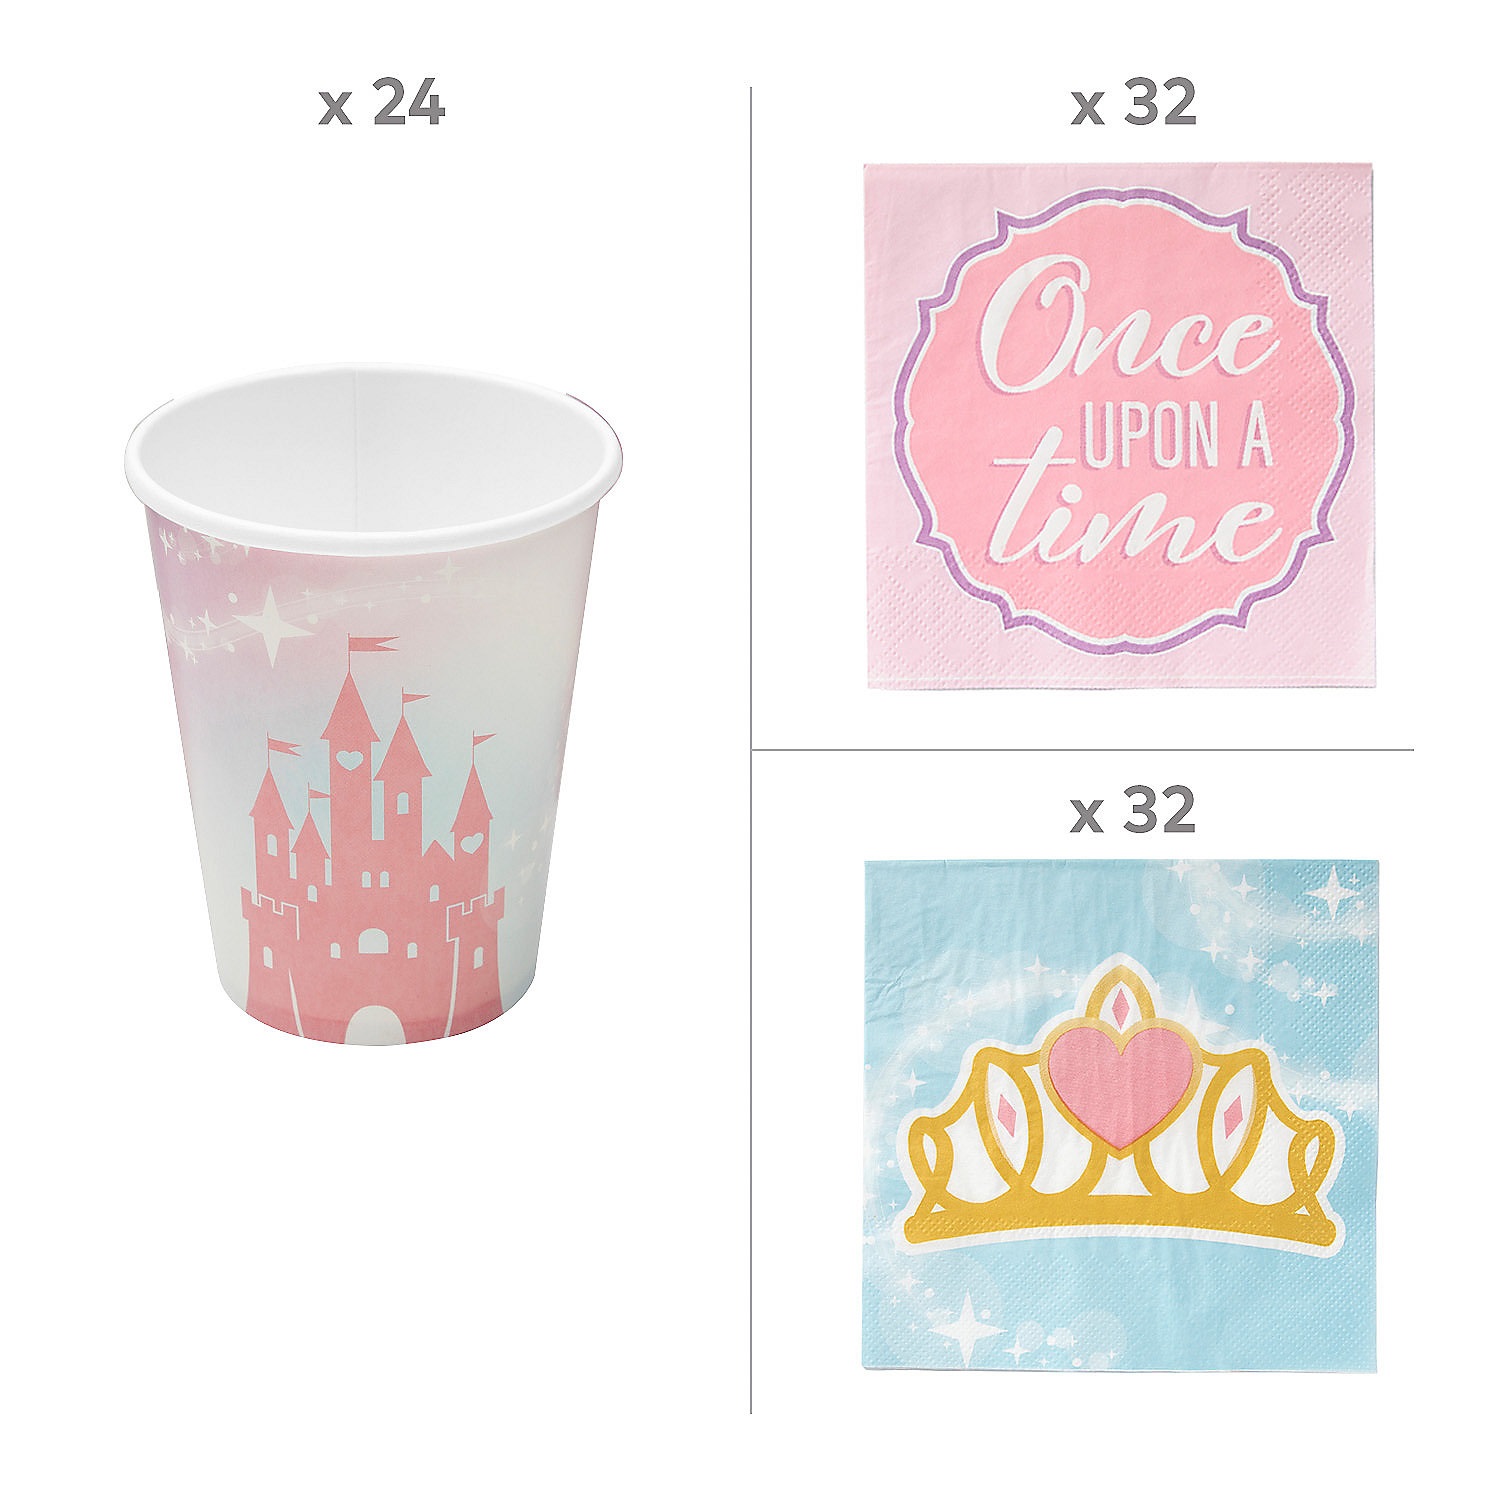 princess-party-tableware-kit-for-24-guests_14115353-a02